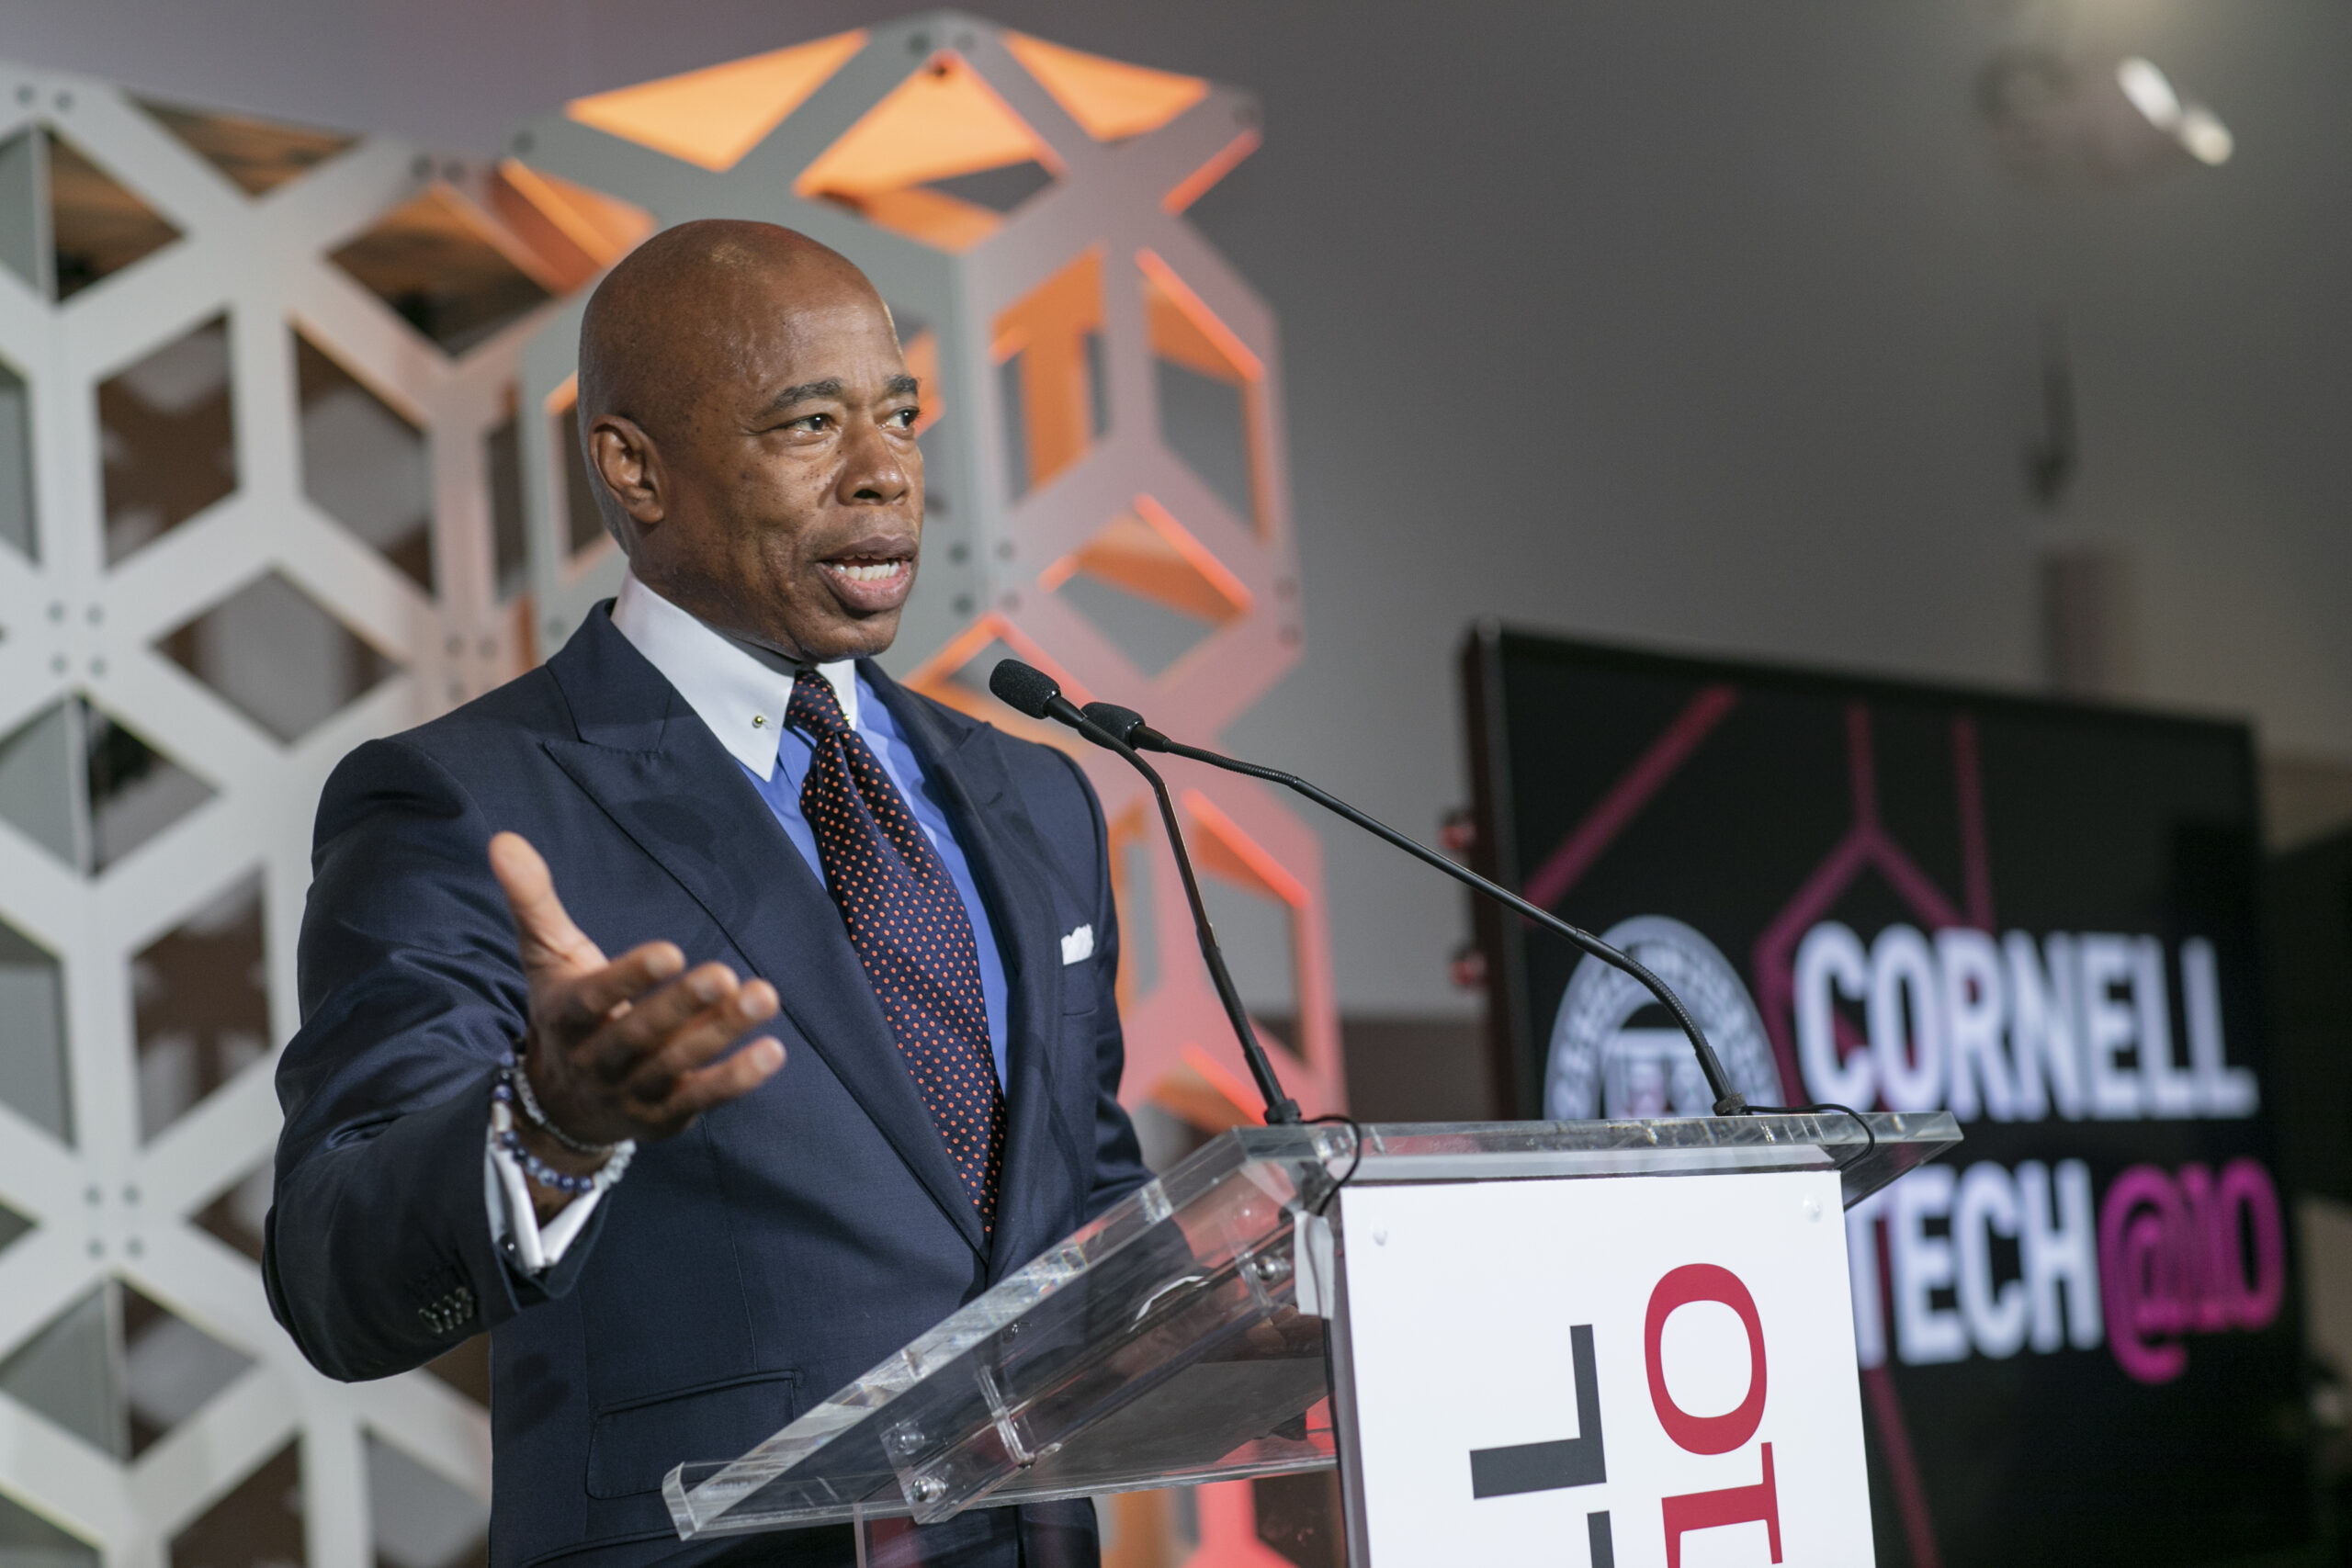 New York City Mayor Eric Adams spoke at the 10th anniversary celebration about the importance of institutions like Cornell Tech in helping grow the city's tech sector.